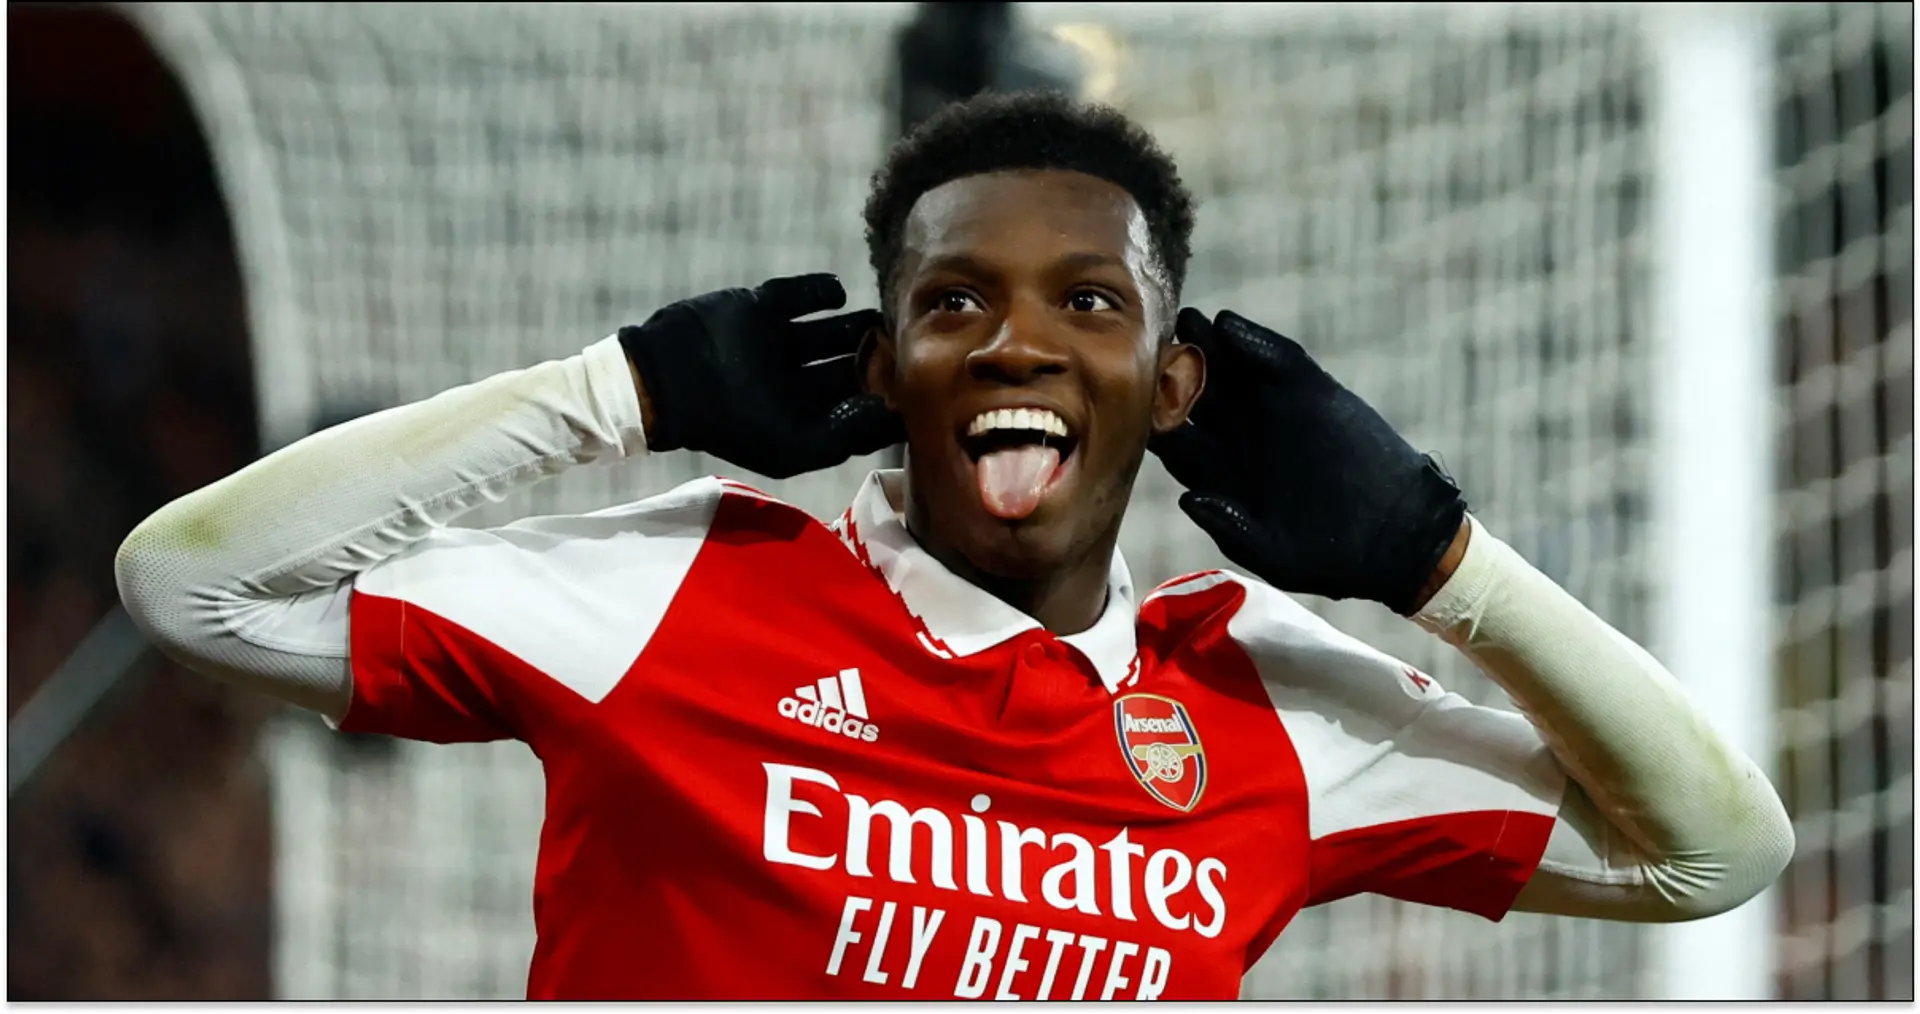 Eddie Nketiah bags brace to win United game for Arsenal — Chelsea dumped him aged 14